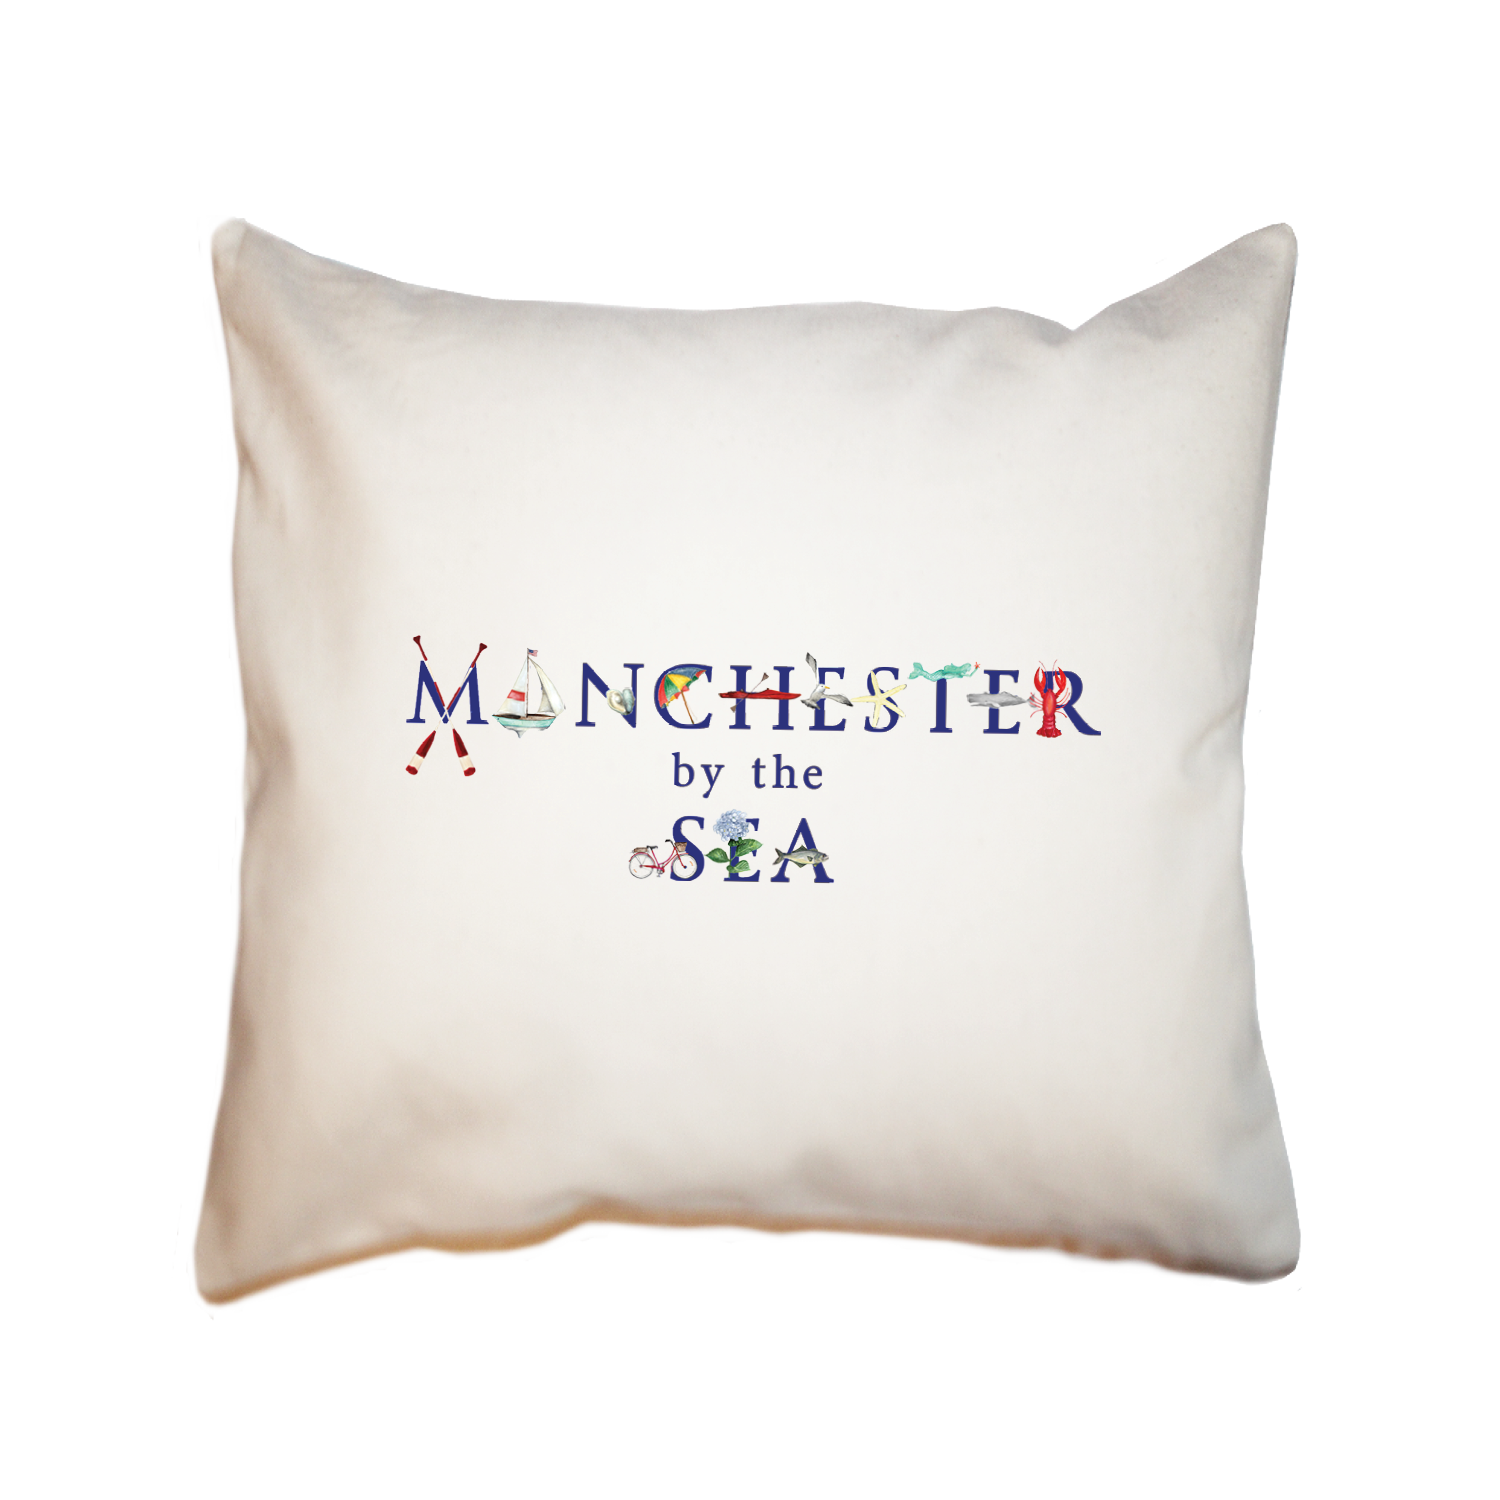 manchester-by-the-sea square pillow